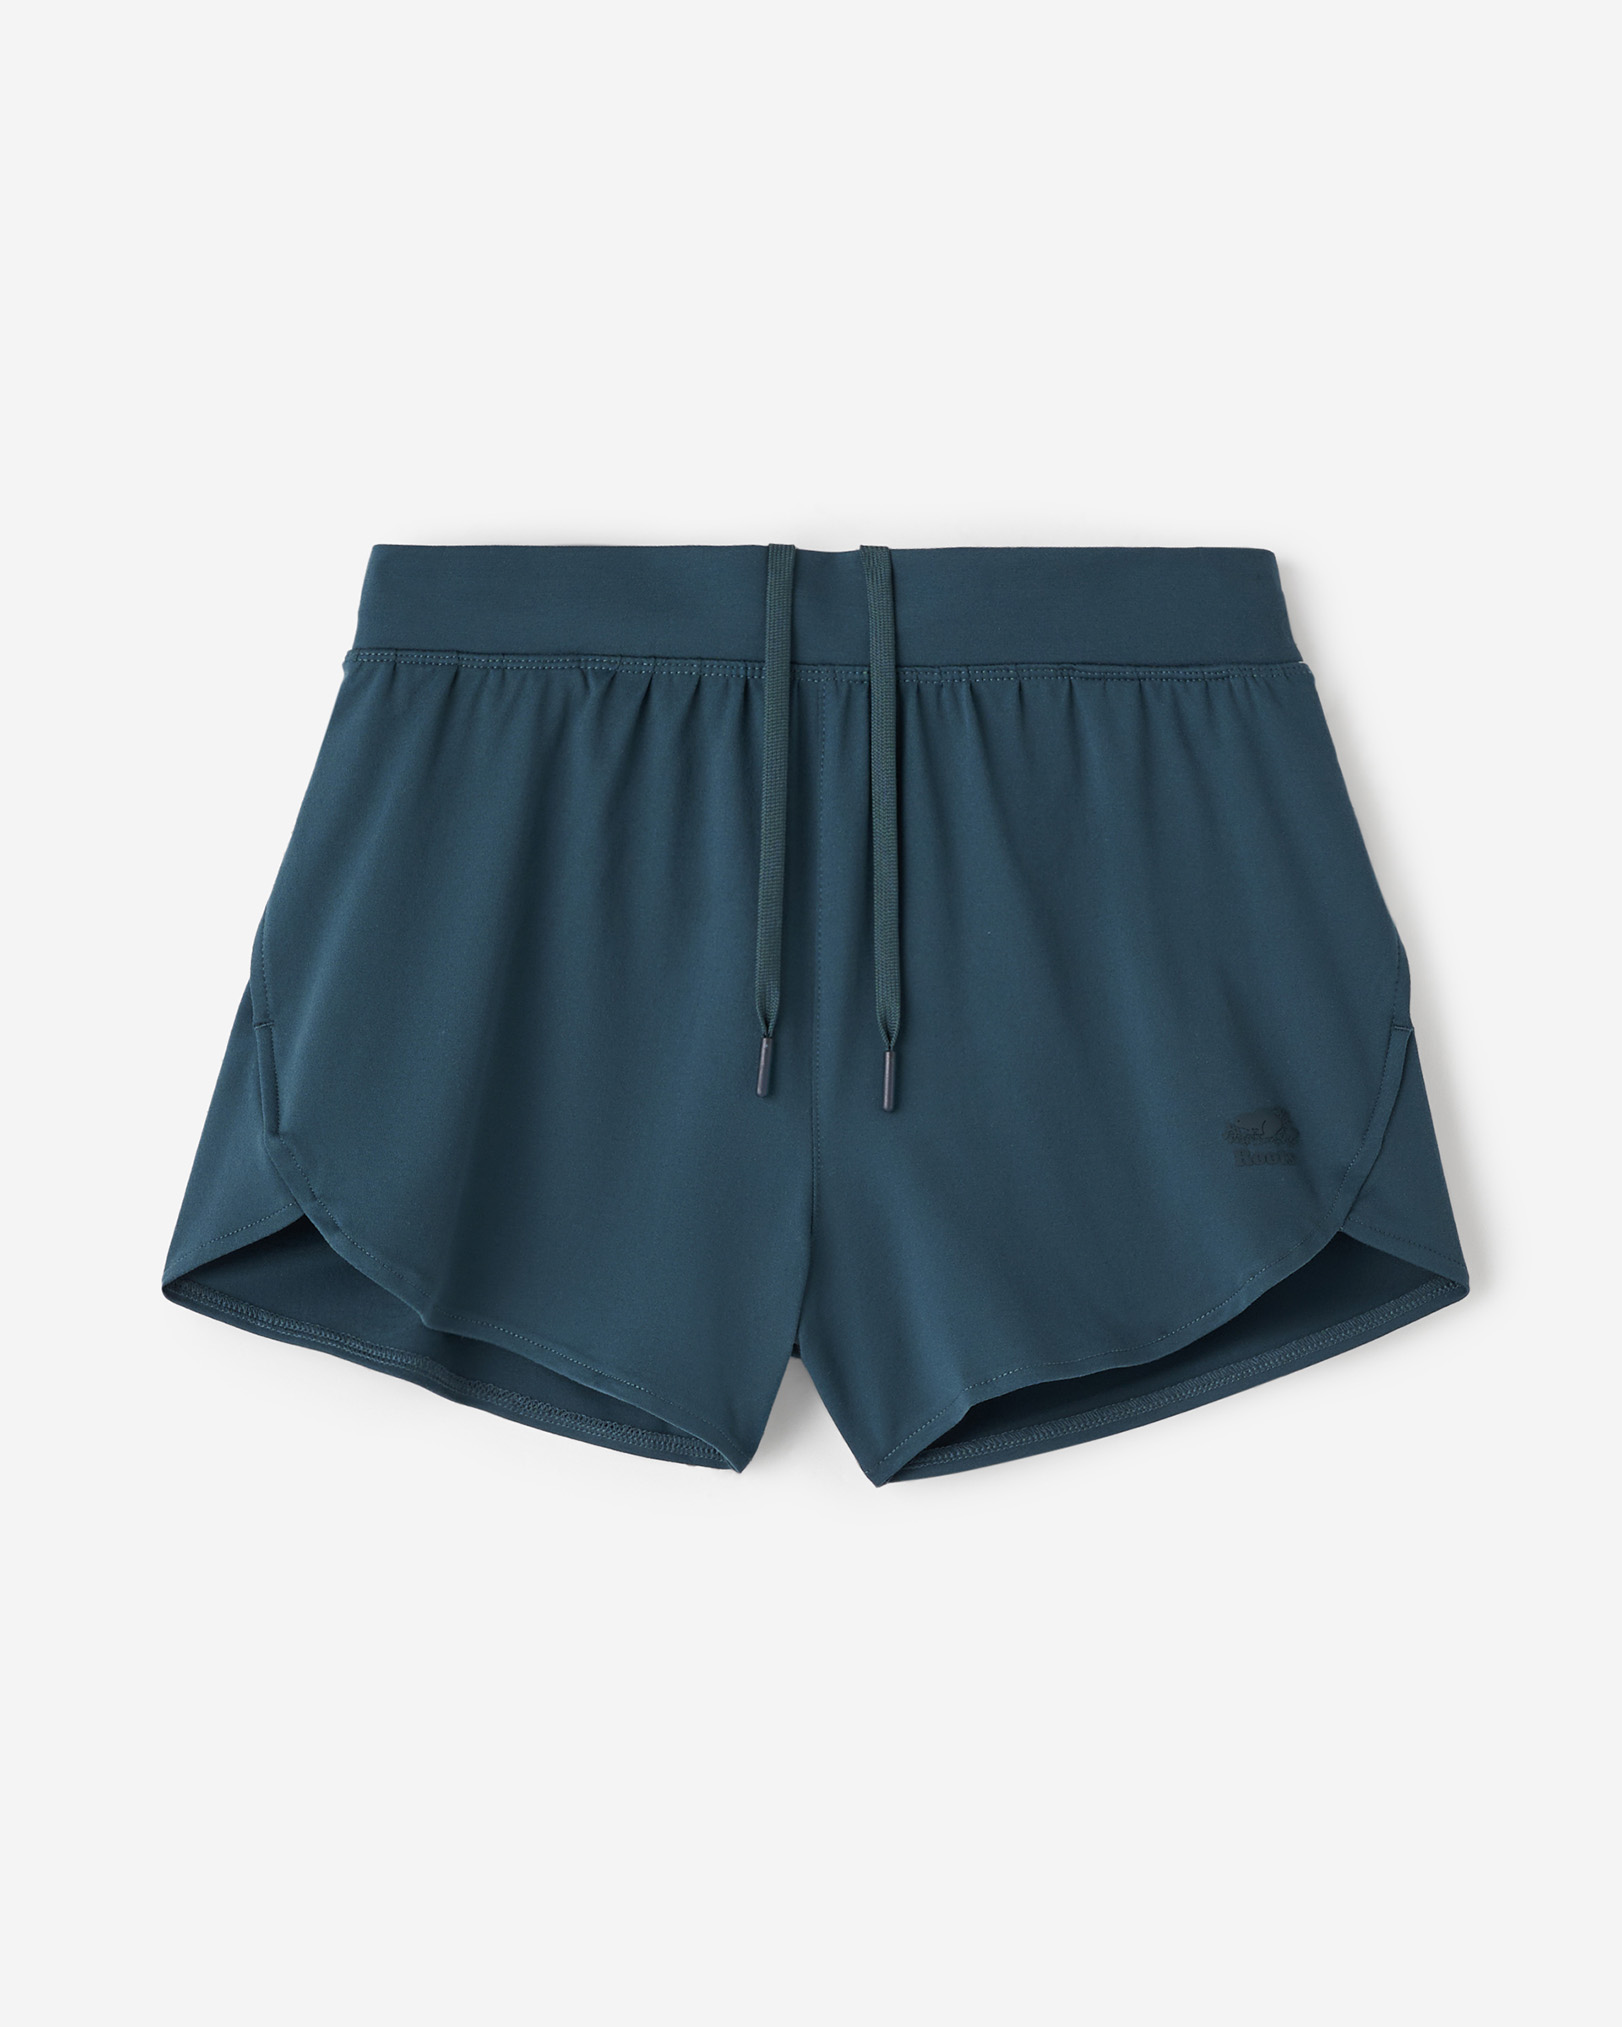 Roots Renew Runner Short 3 Inch in Forest Teal